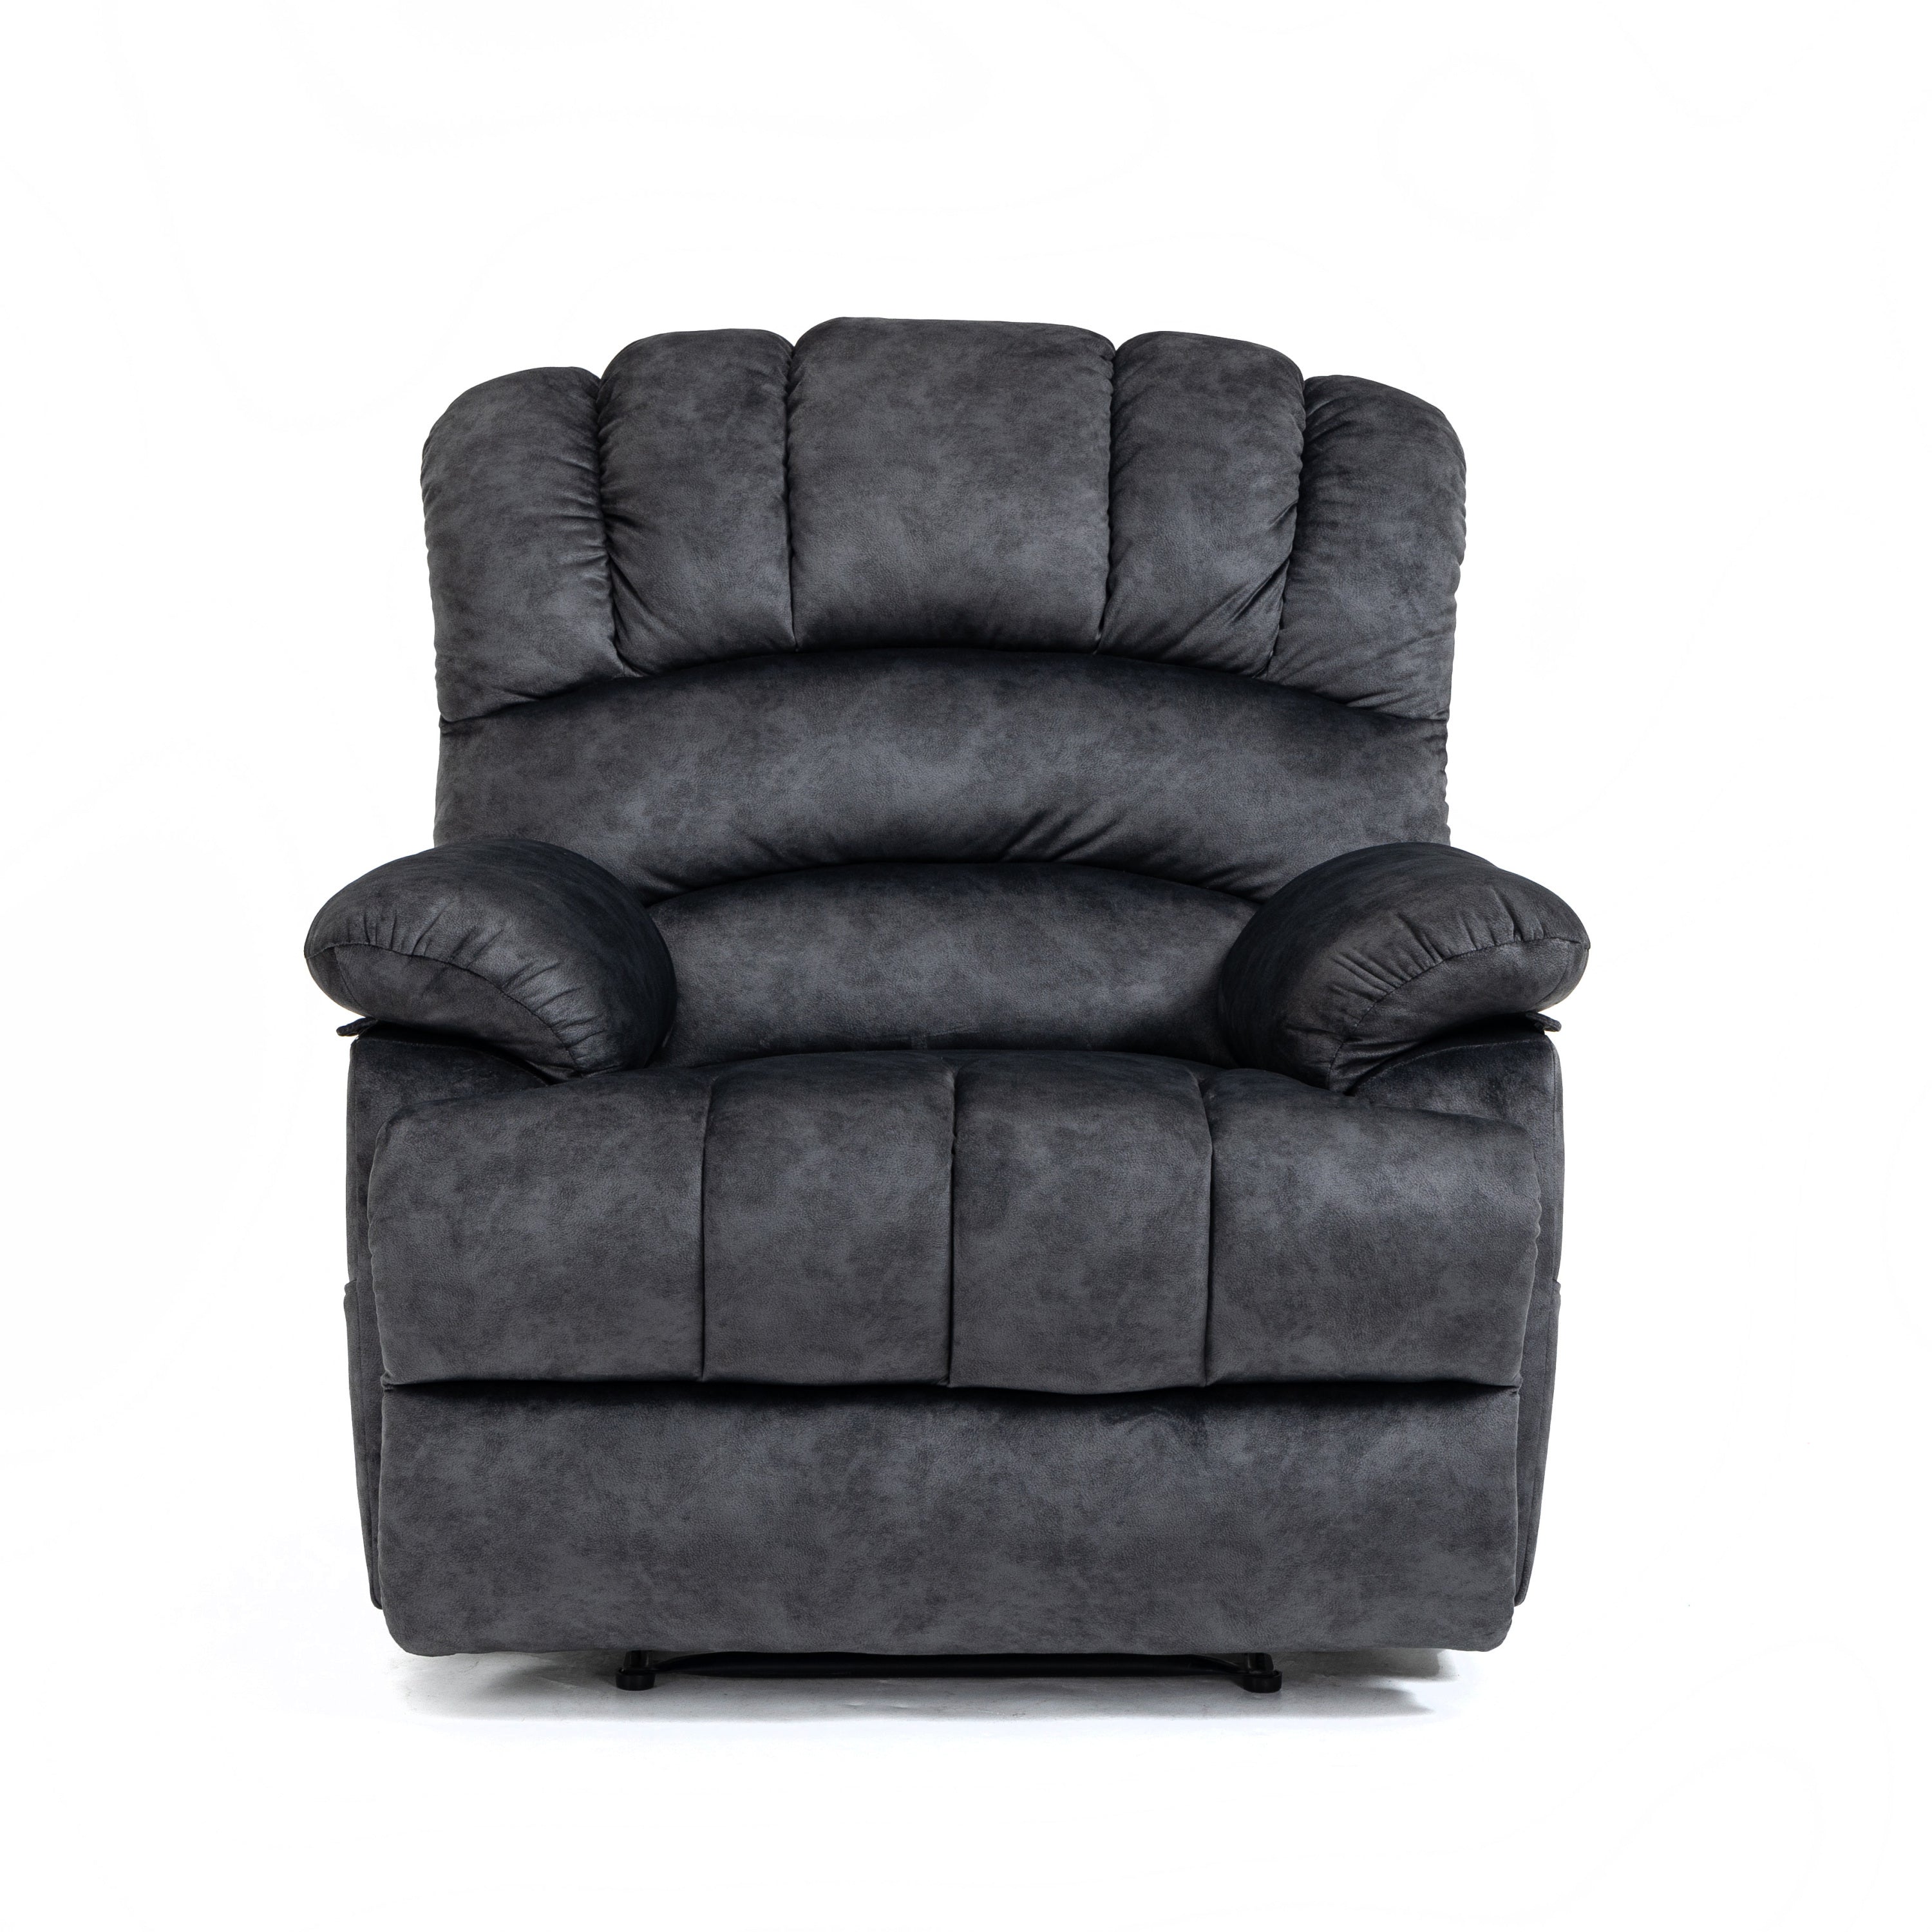 🆓🚛 Large Manual Recliner Chair In Fabric for Living Room, Gray